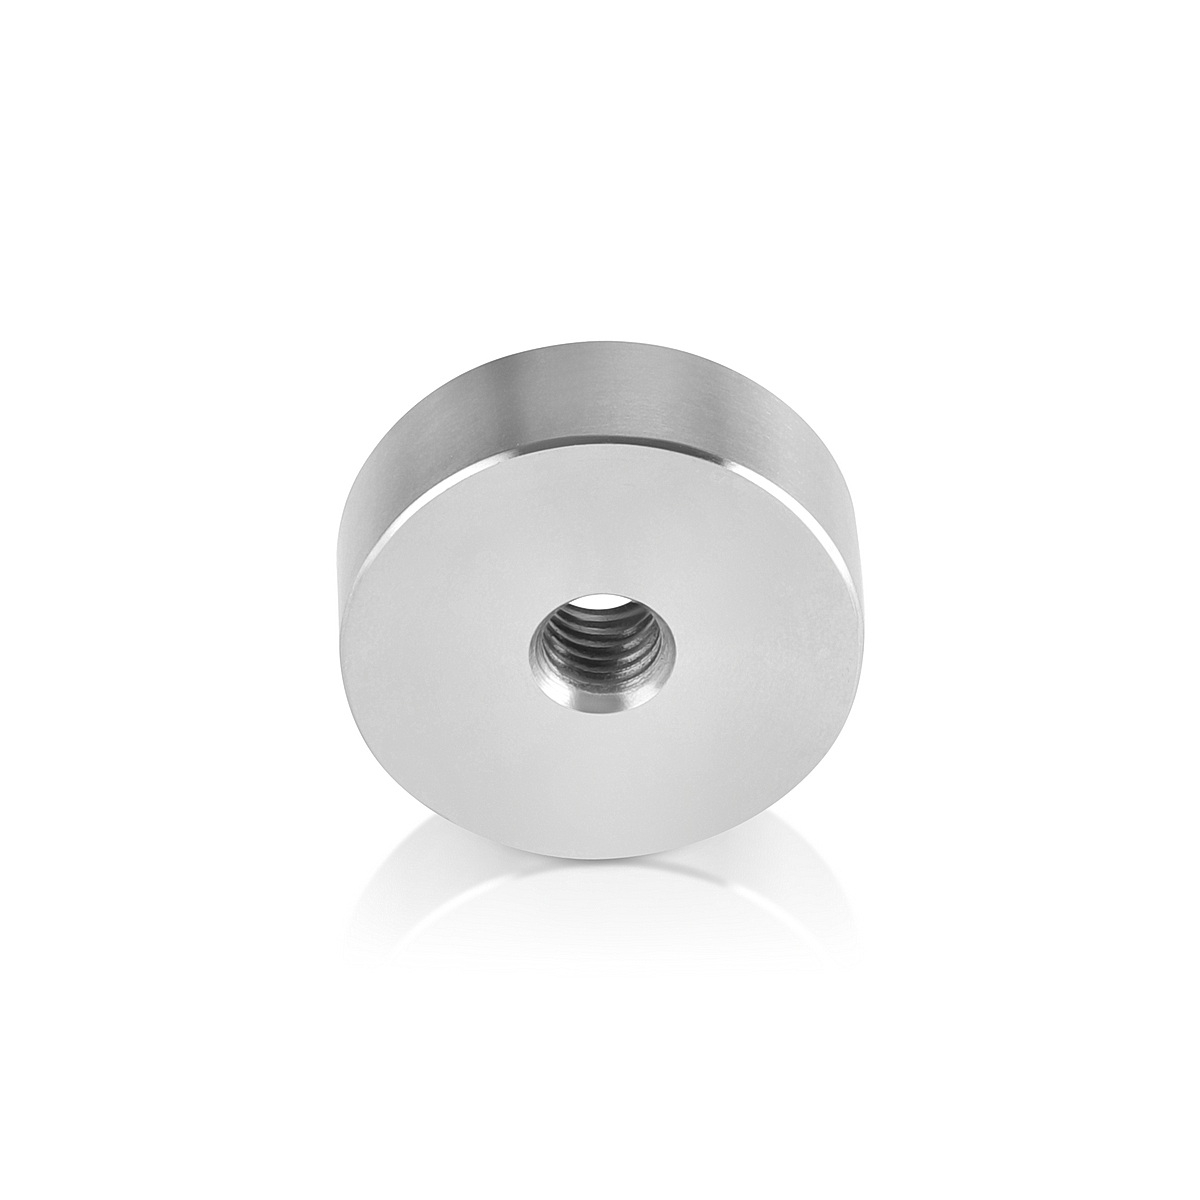 3/8-16 Threaded Barrels Diameter: 1 1/2'', Length: 1/2'',  Stainless Steel 316, Brushed Satin Finish [Required Material Hole Size: 3/8'' ]